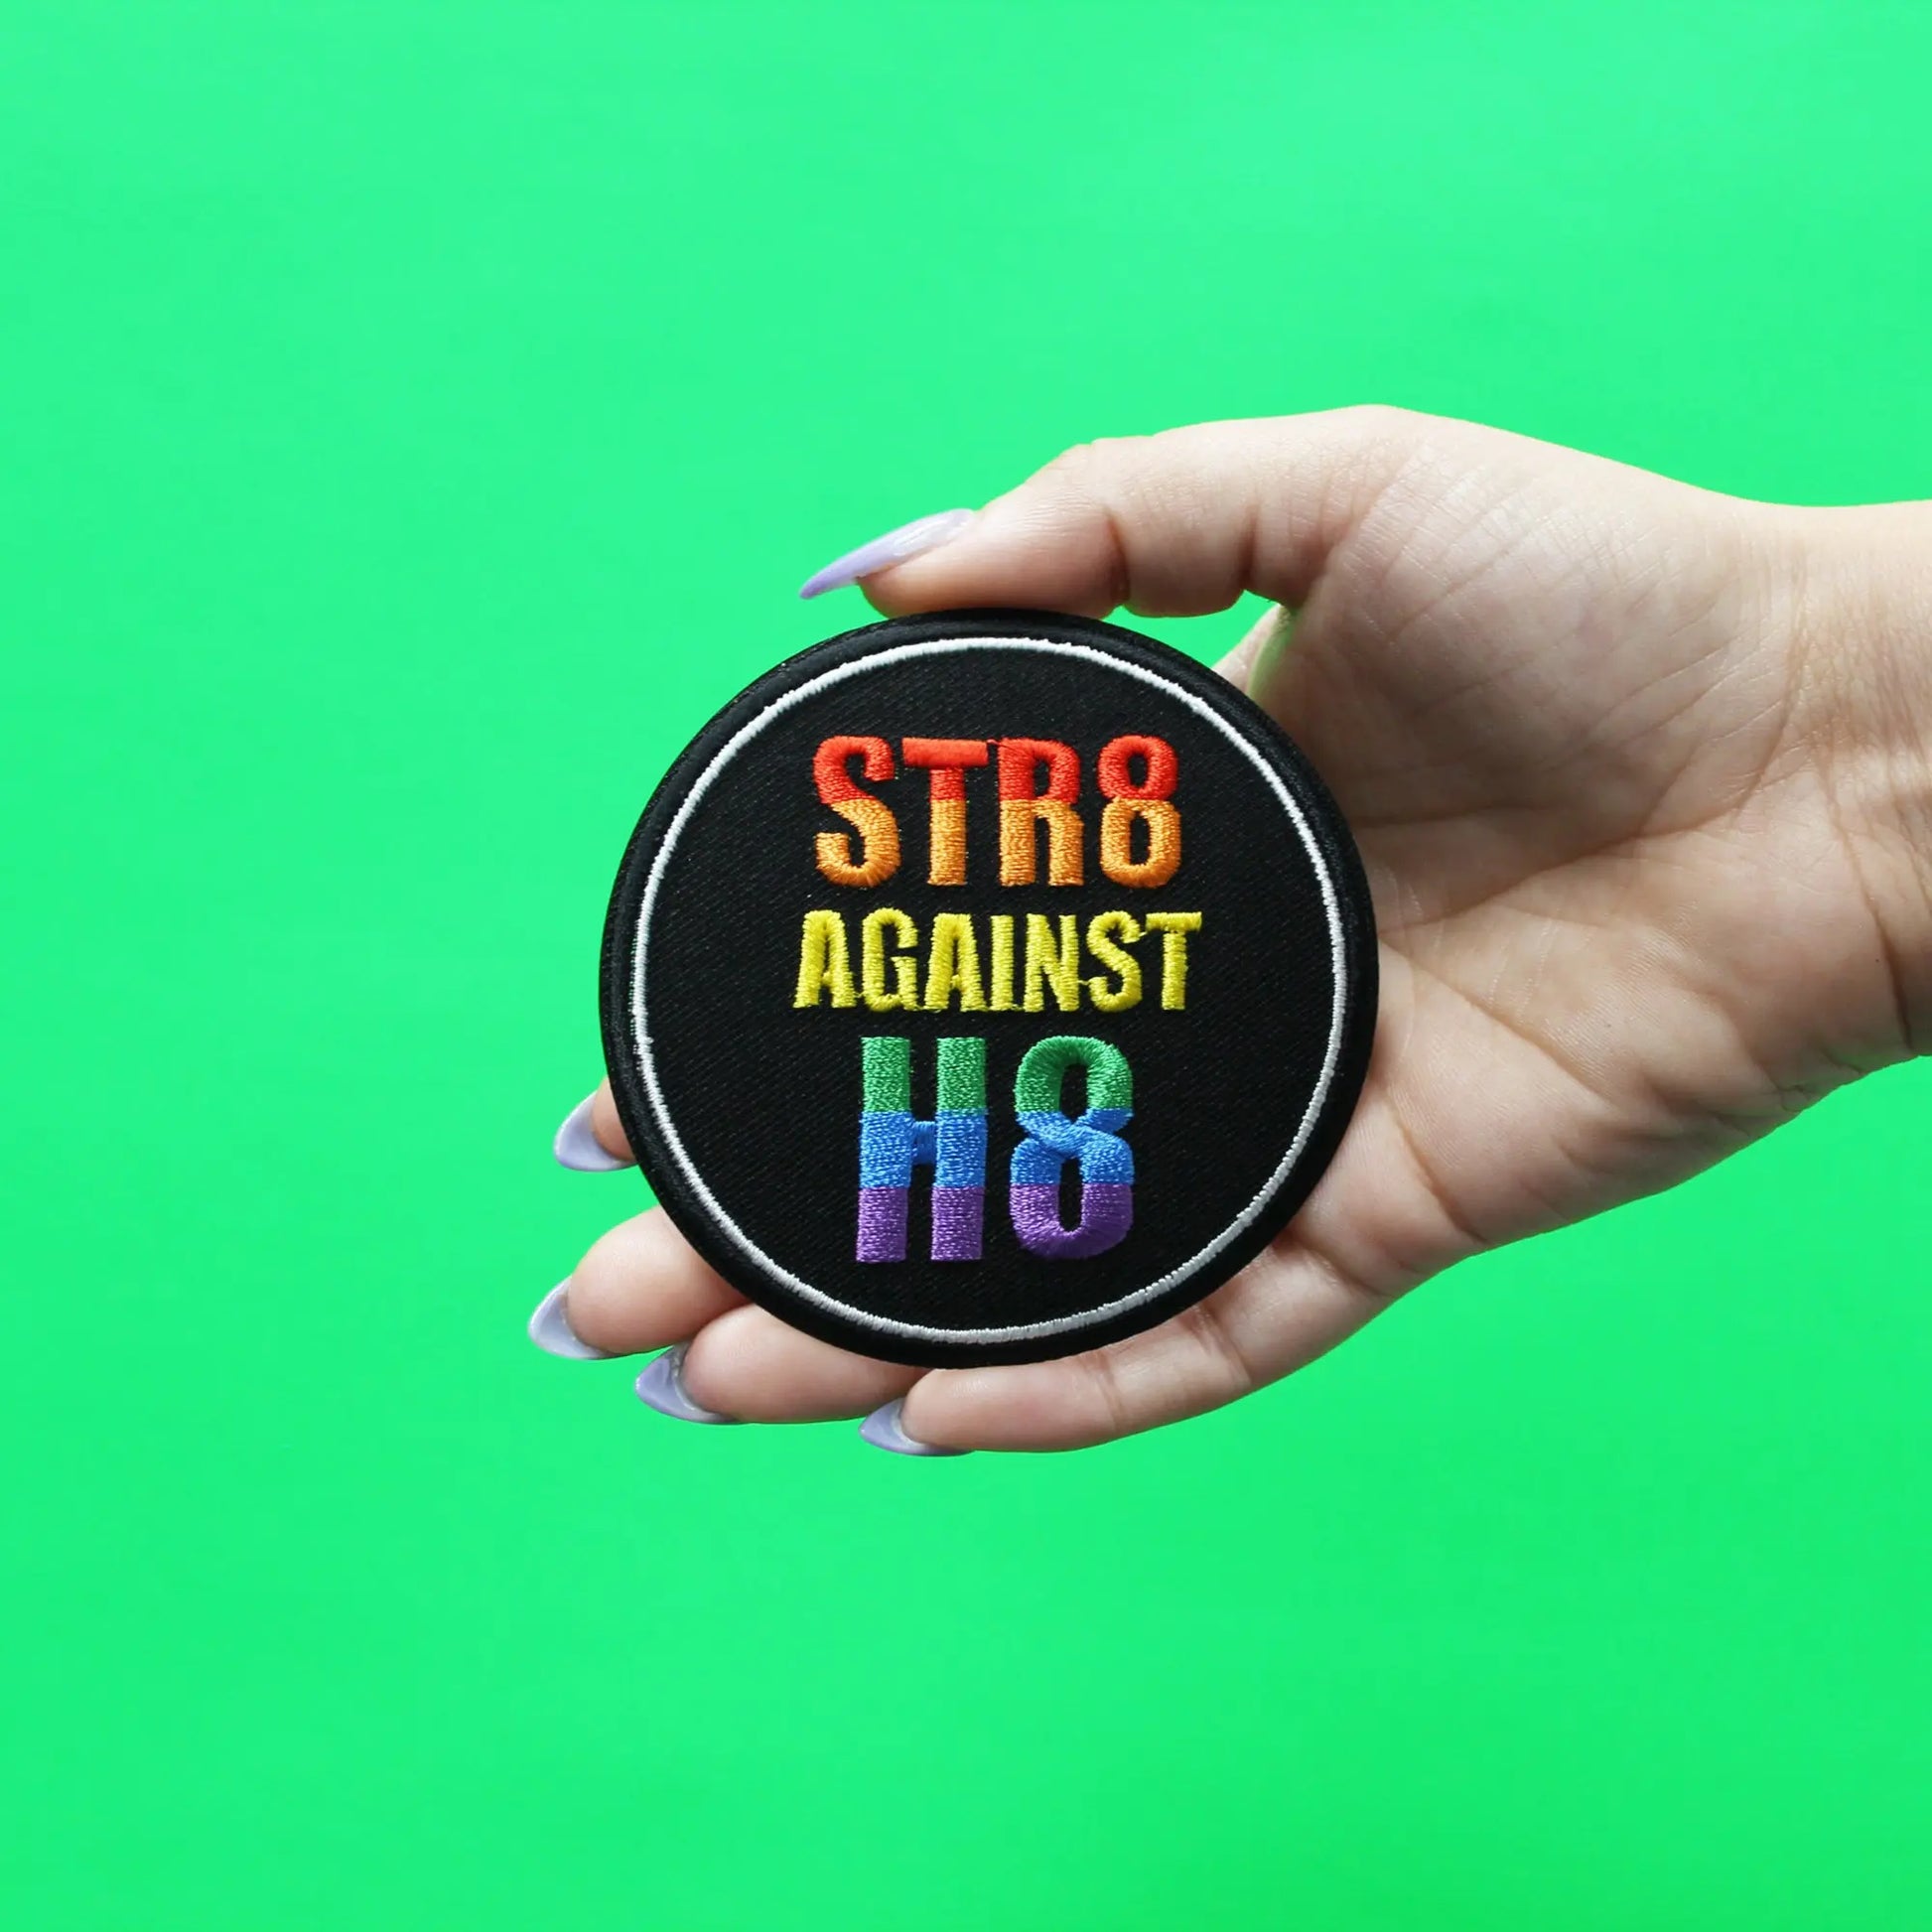 Str8 Against H8 Patch LGBTQ+ Community Embroidered Iron On 